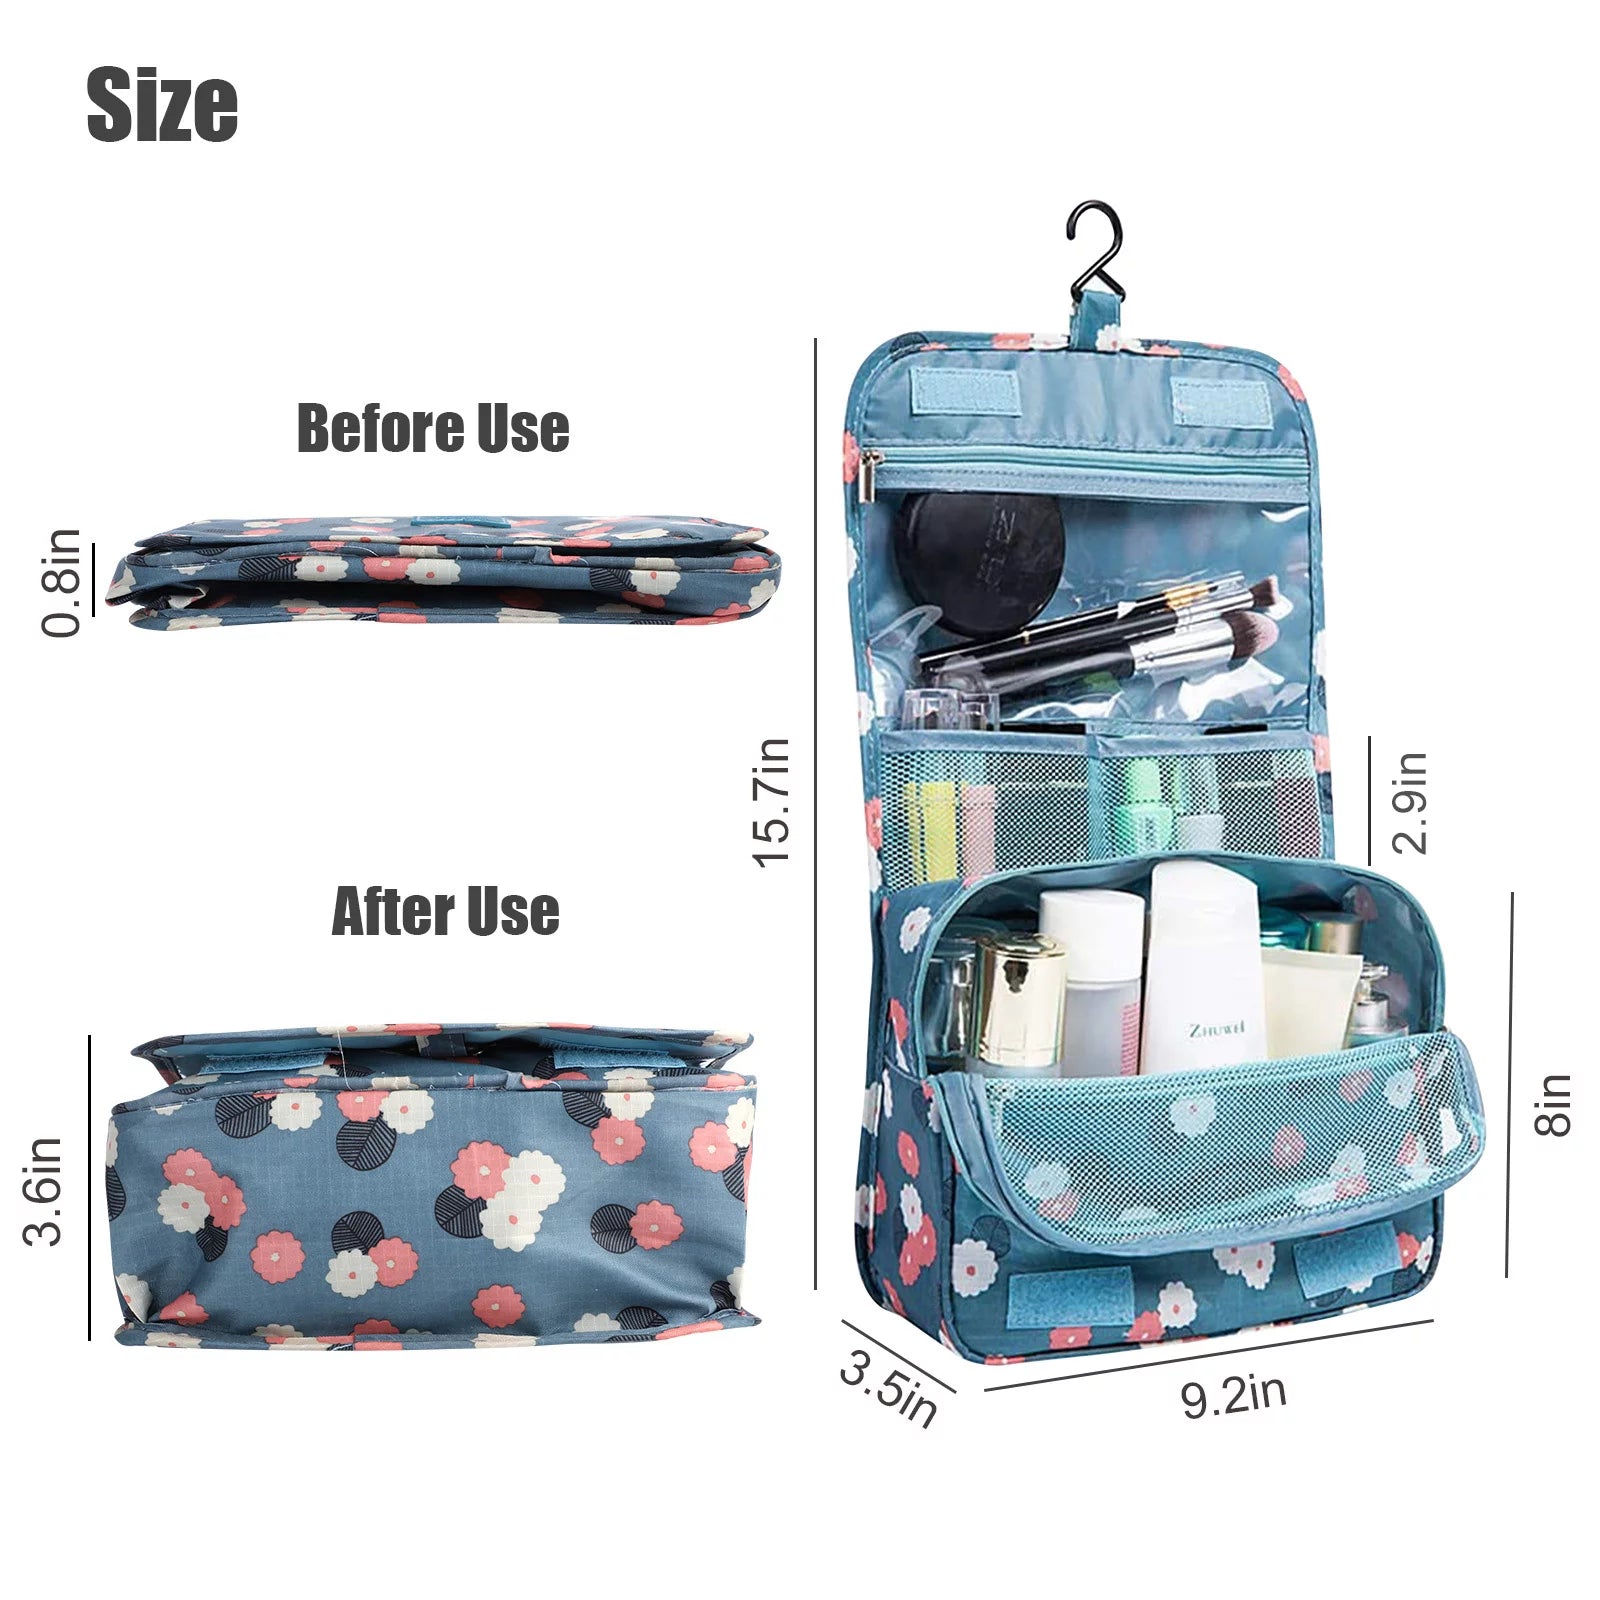 Travel Hook Cosmetic Bag, Hanging Dry Wet Separation Bag, Waterproof Cosmetic Bag, Portable Toiletry Storage Bag, Multifunction Travel Hanging Pouch, Beautician Folding Makeup Bag, Monument Hanging Toiletry Bag, Folding Makeup Bags